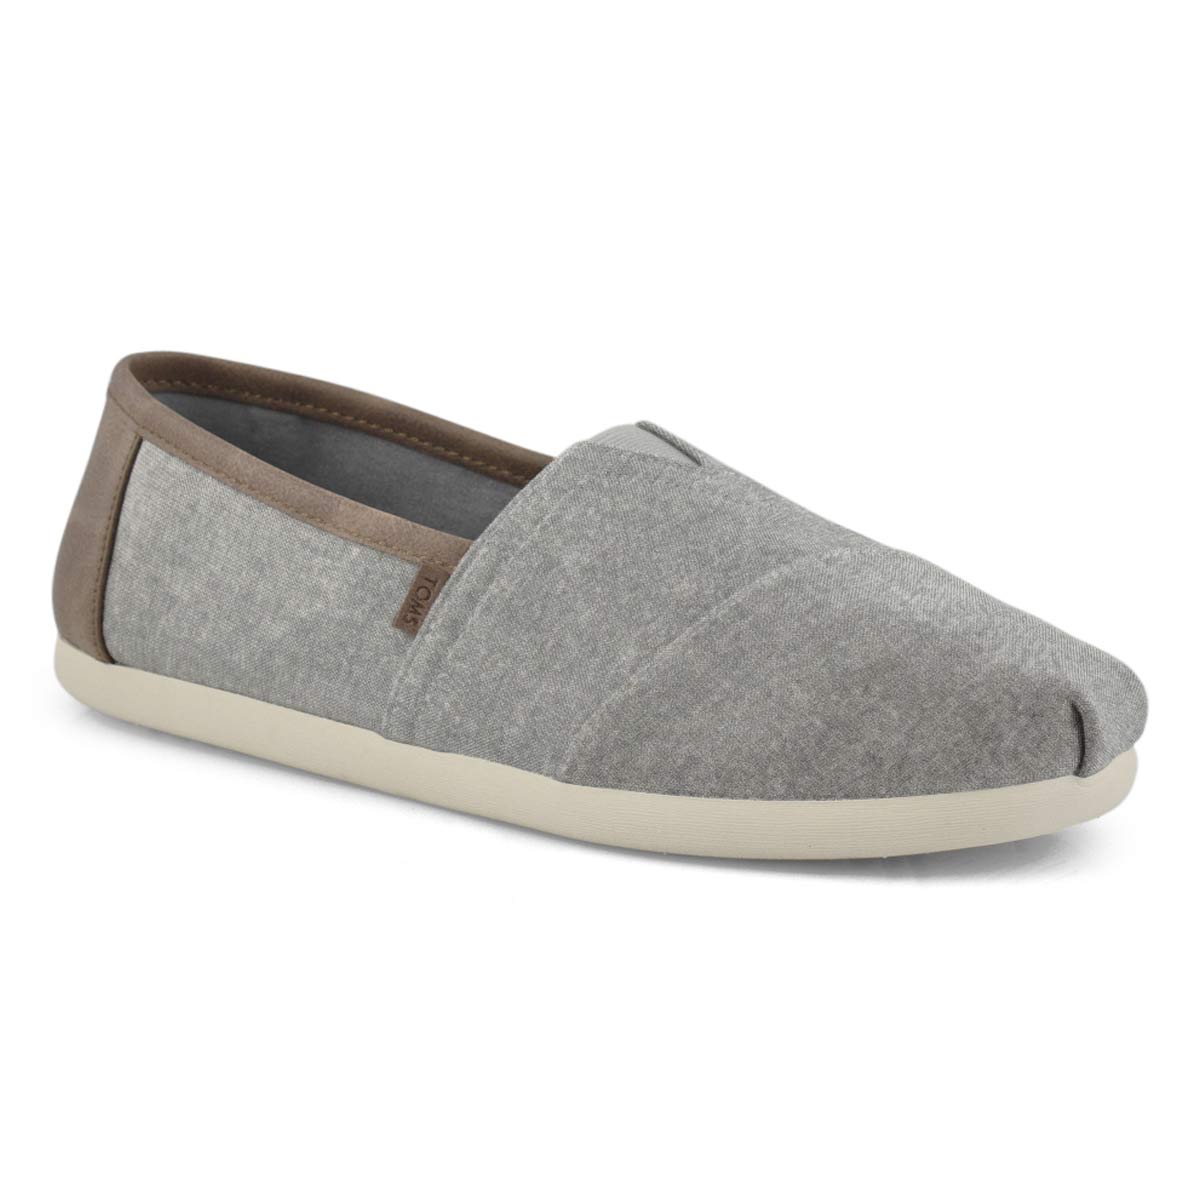 TOMS Men's Classic Casual Loafer - Navy | SoftMoc.com